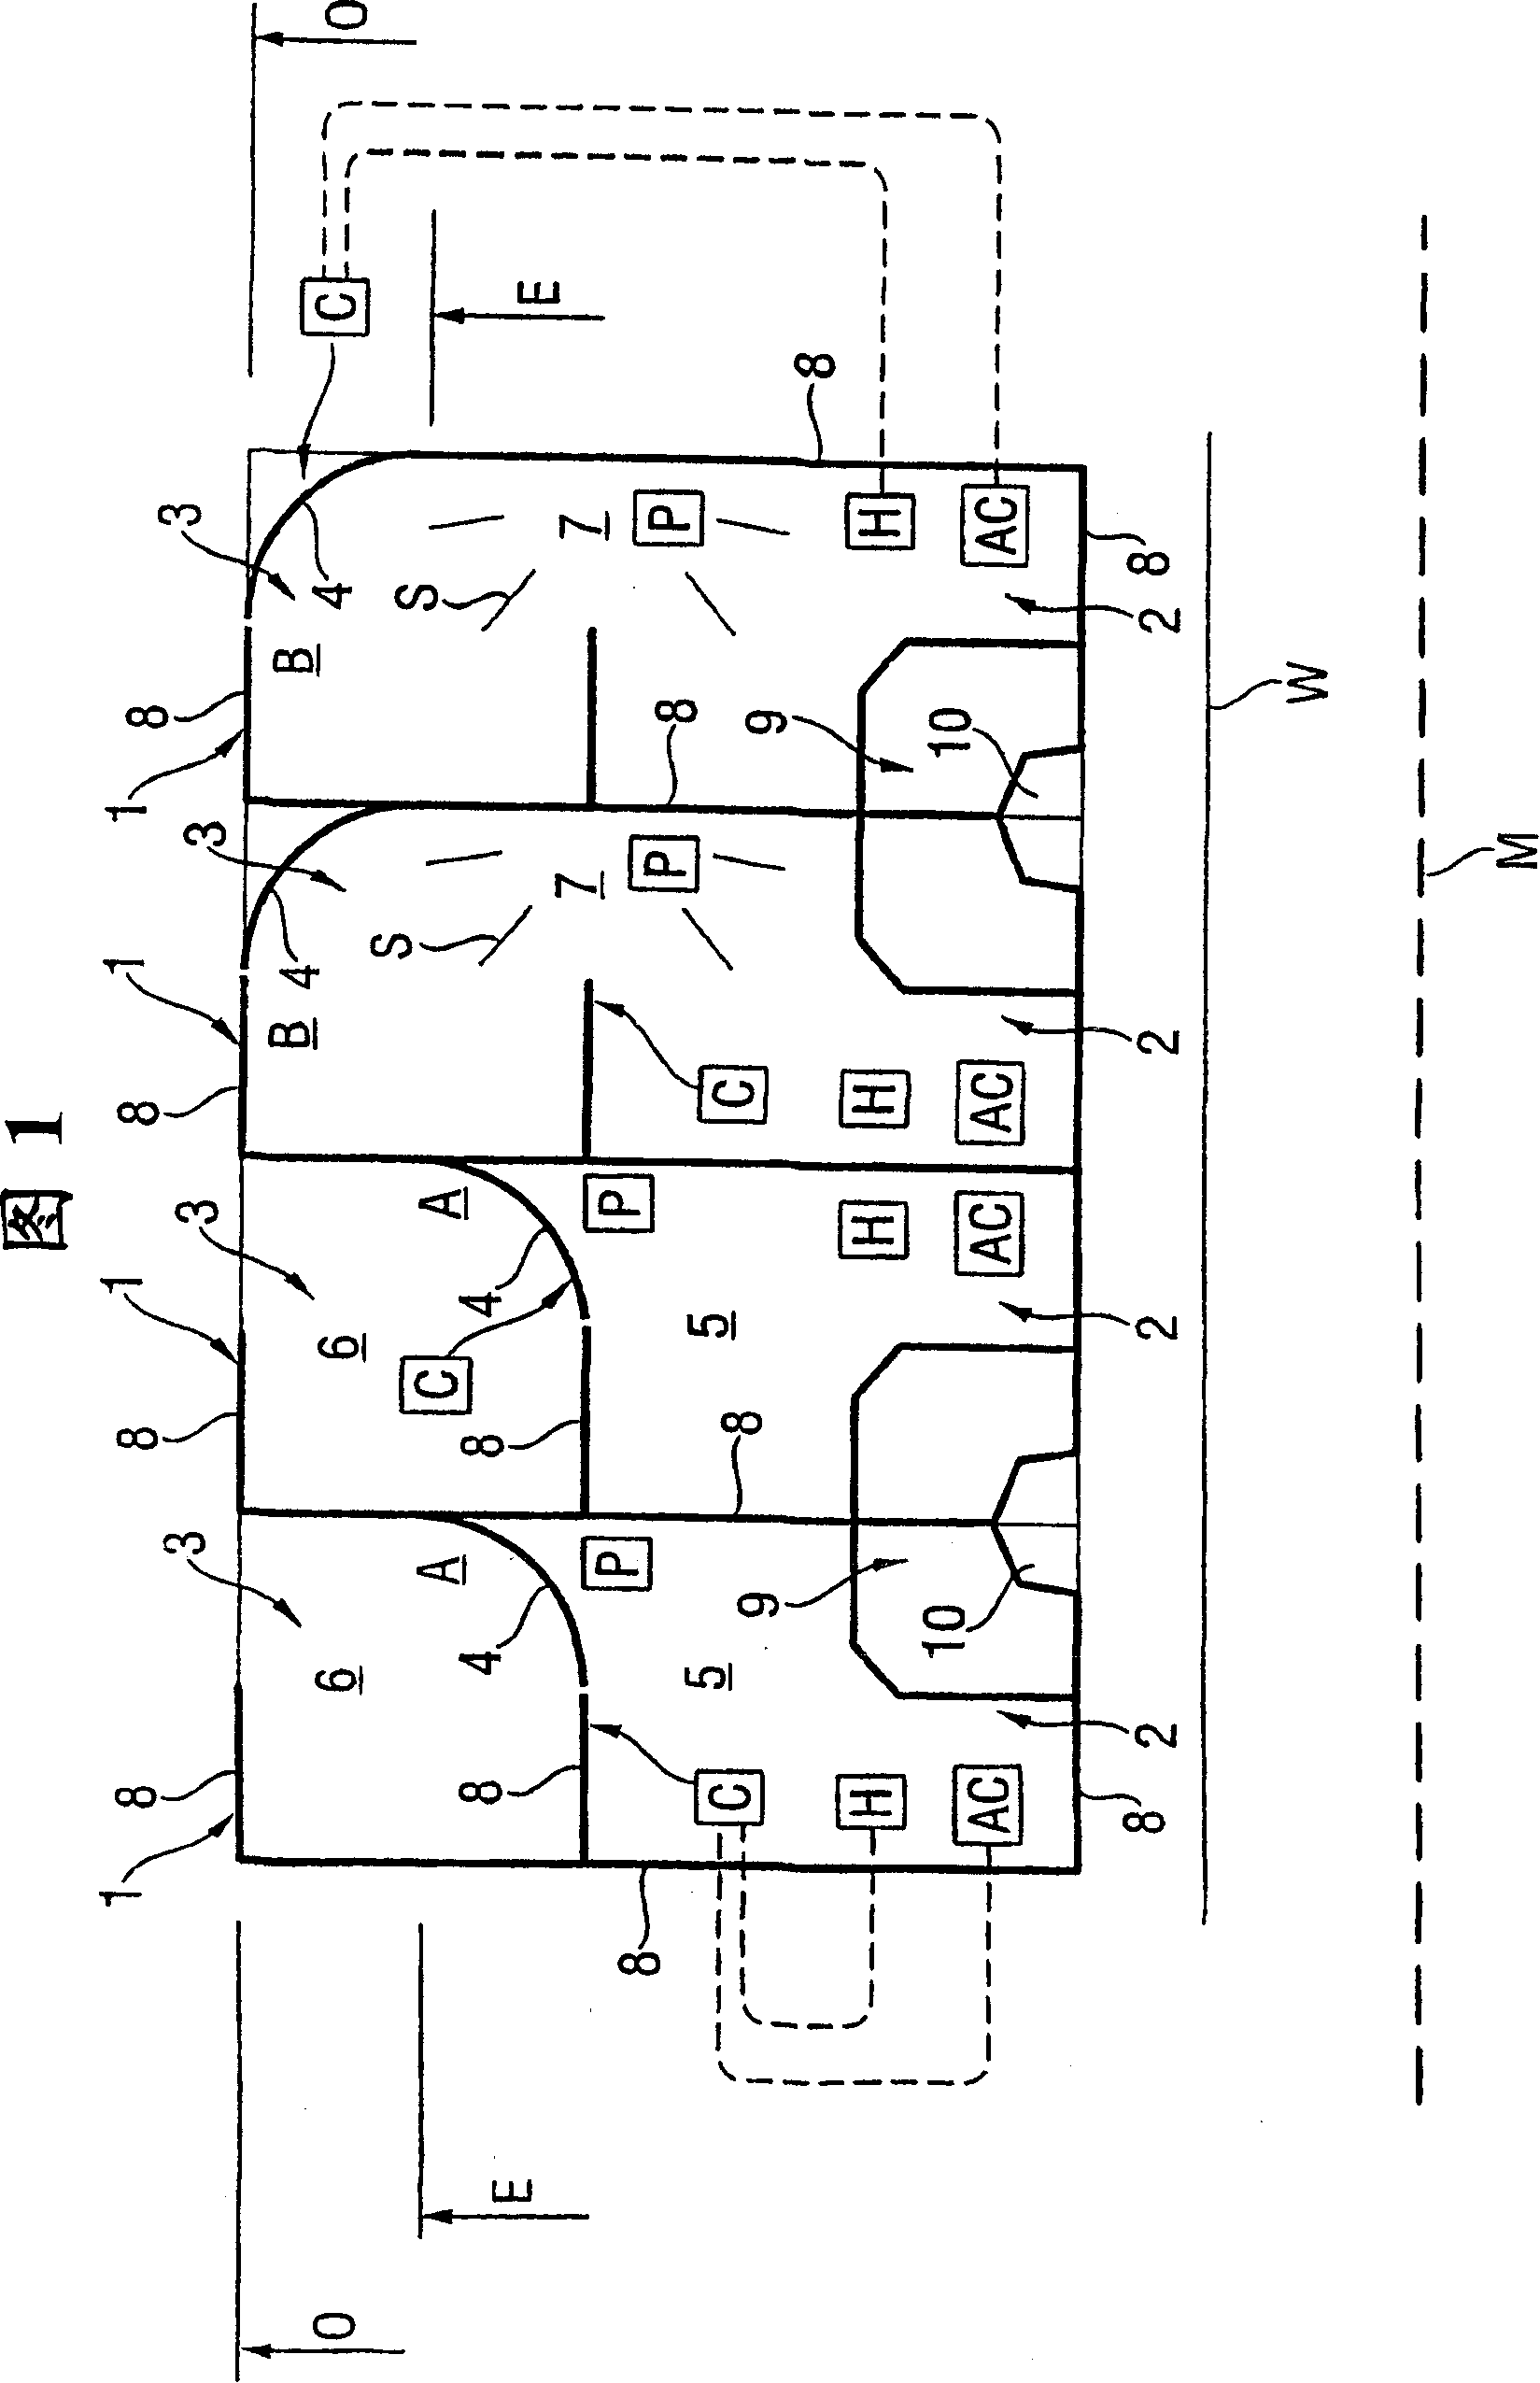 Method for modifying a room unit and a modifiable room unit